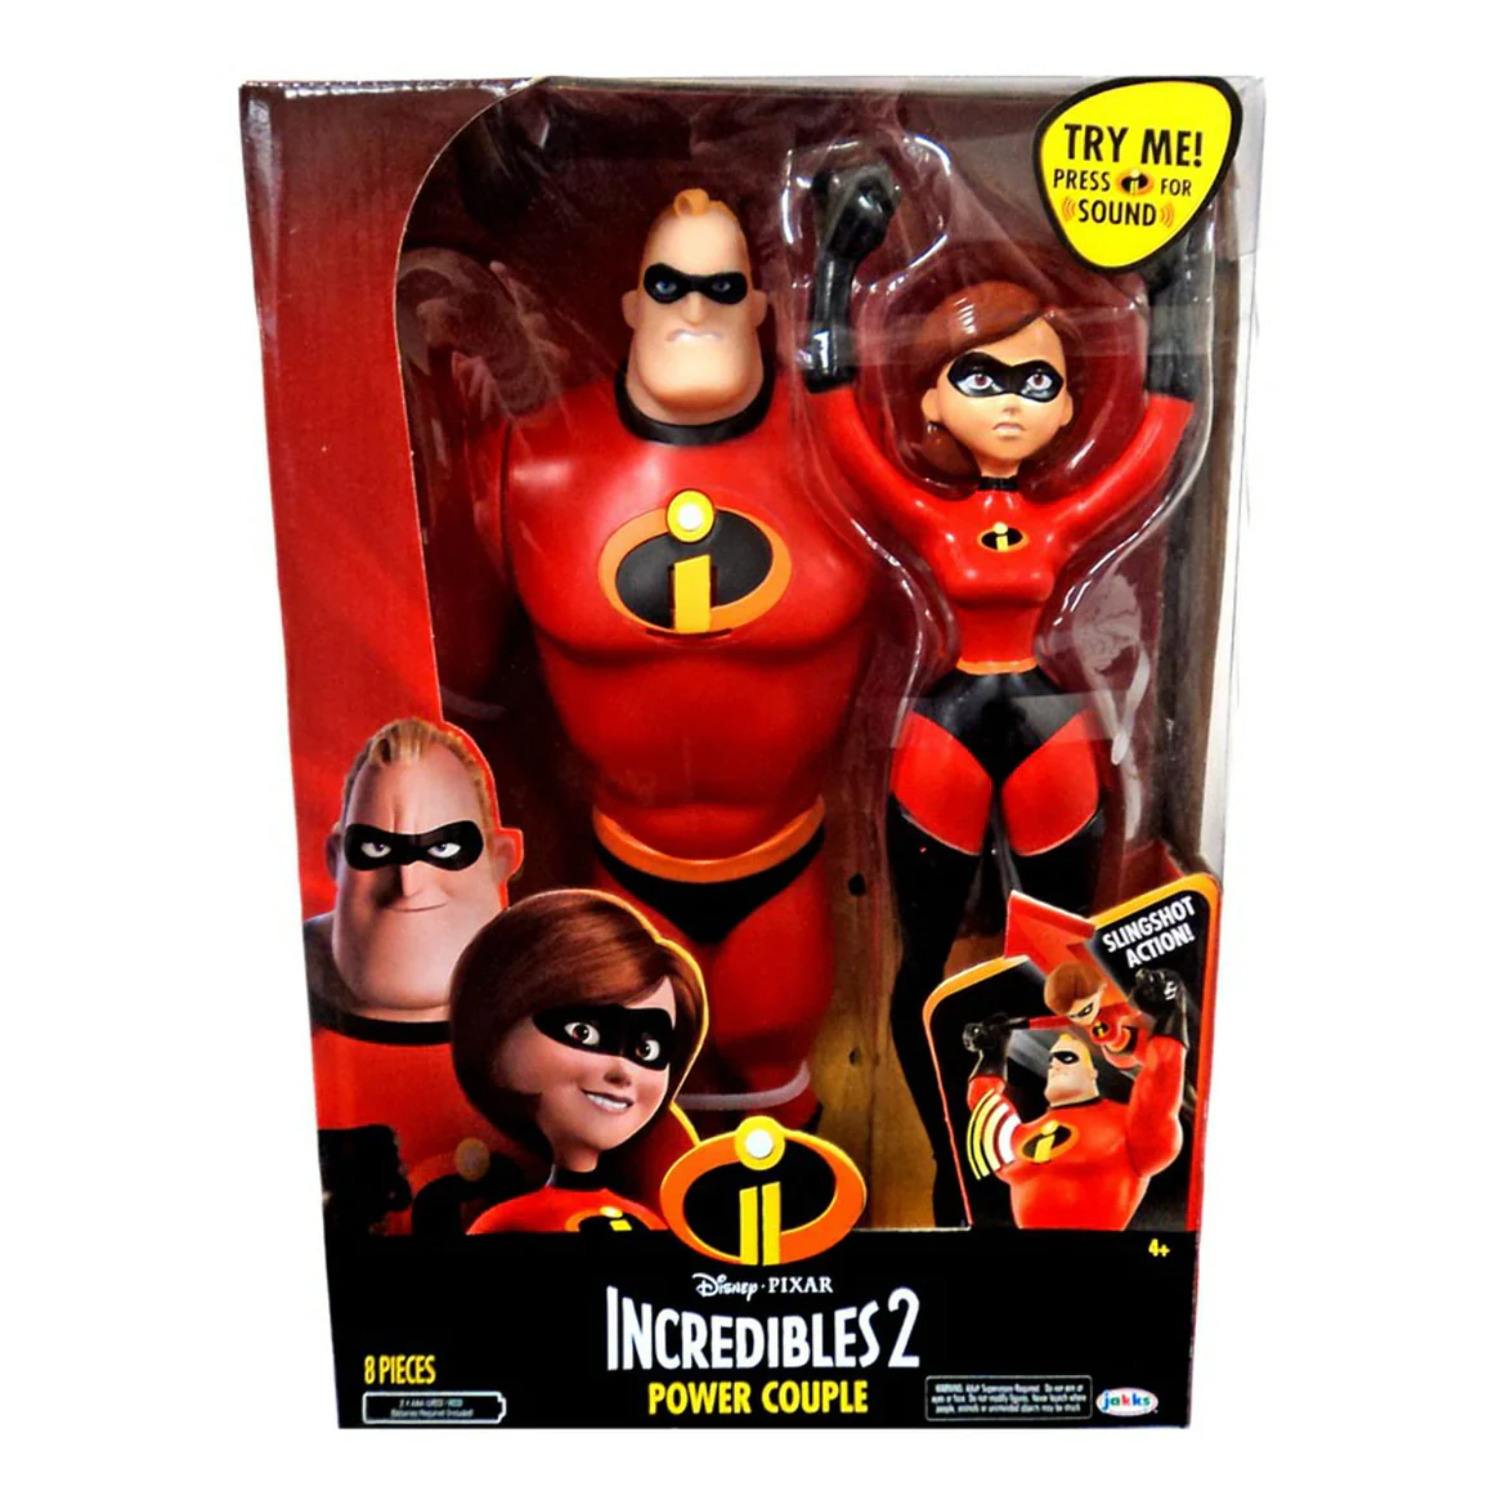 Incredibles 2 Power Couple Mr. Incredible and Elastigirl 12" Action Figures with Slingshot Feature - image 1 of 6